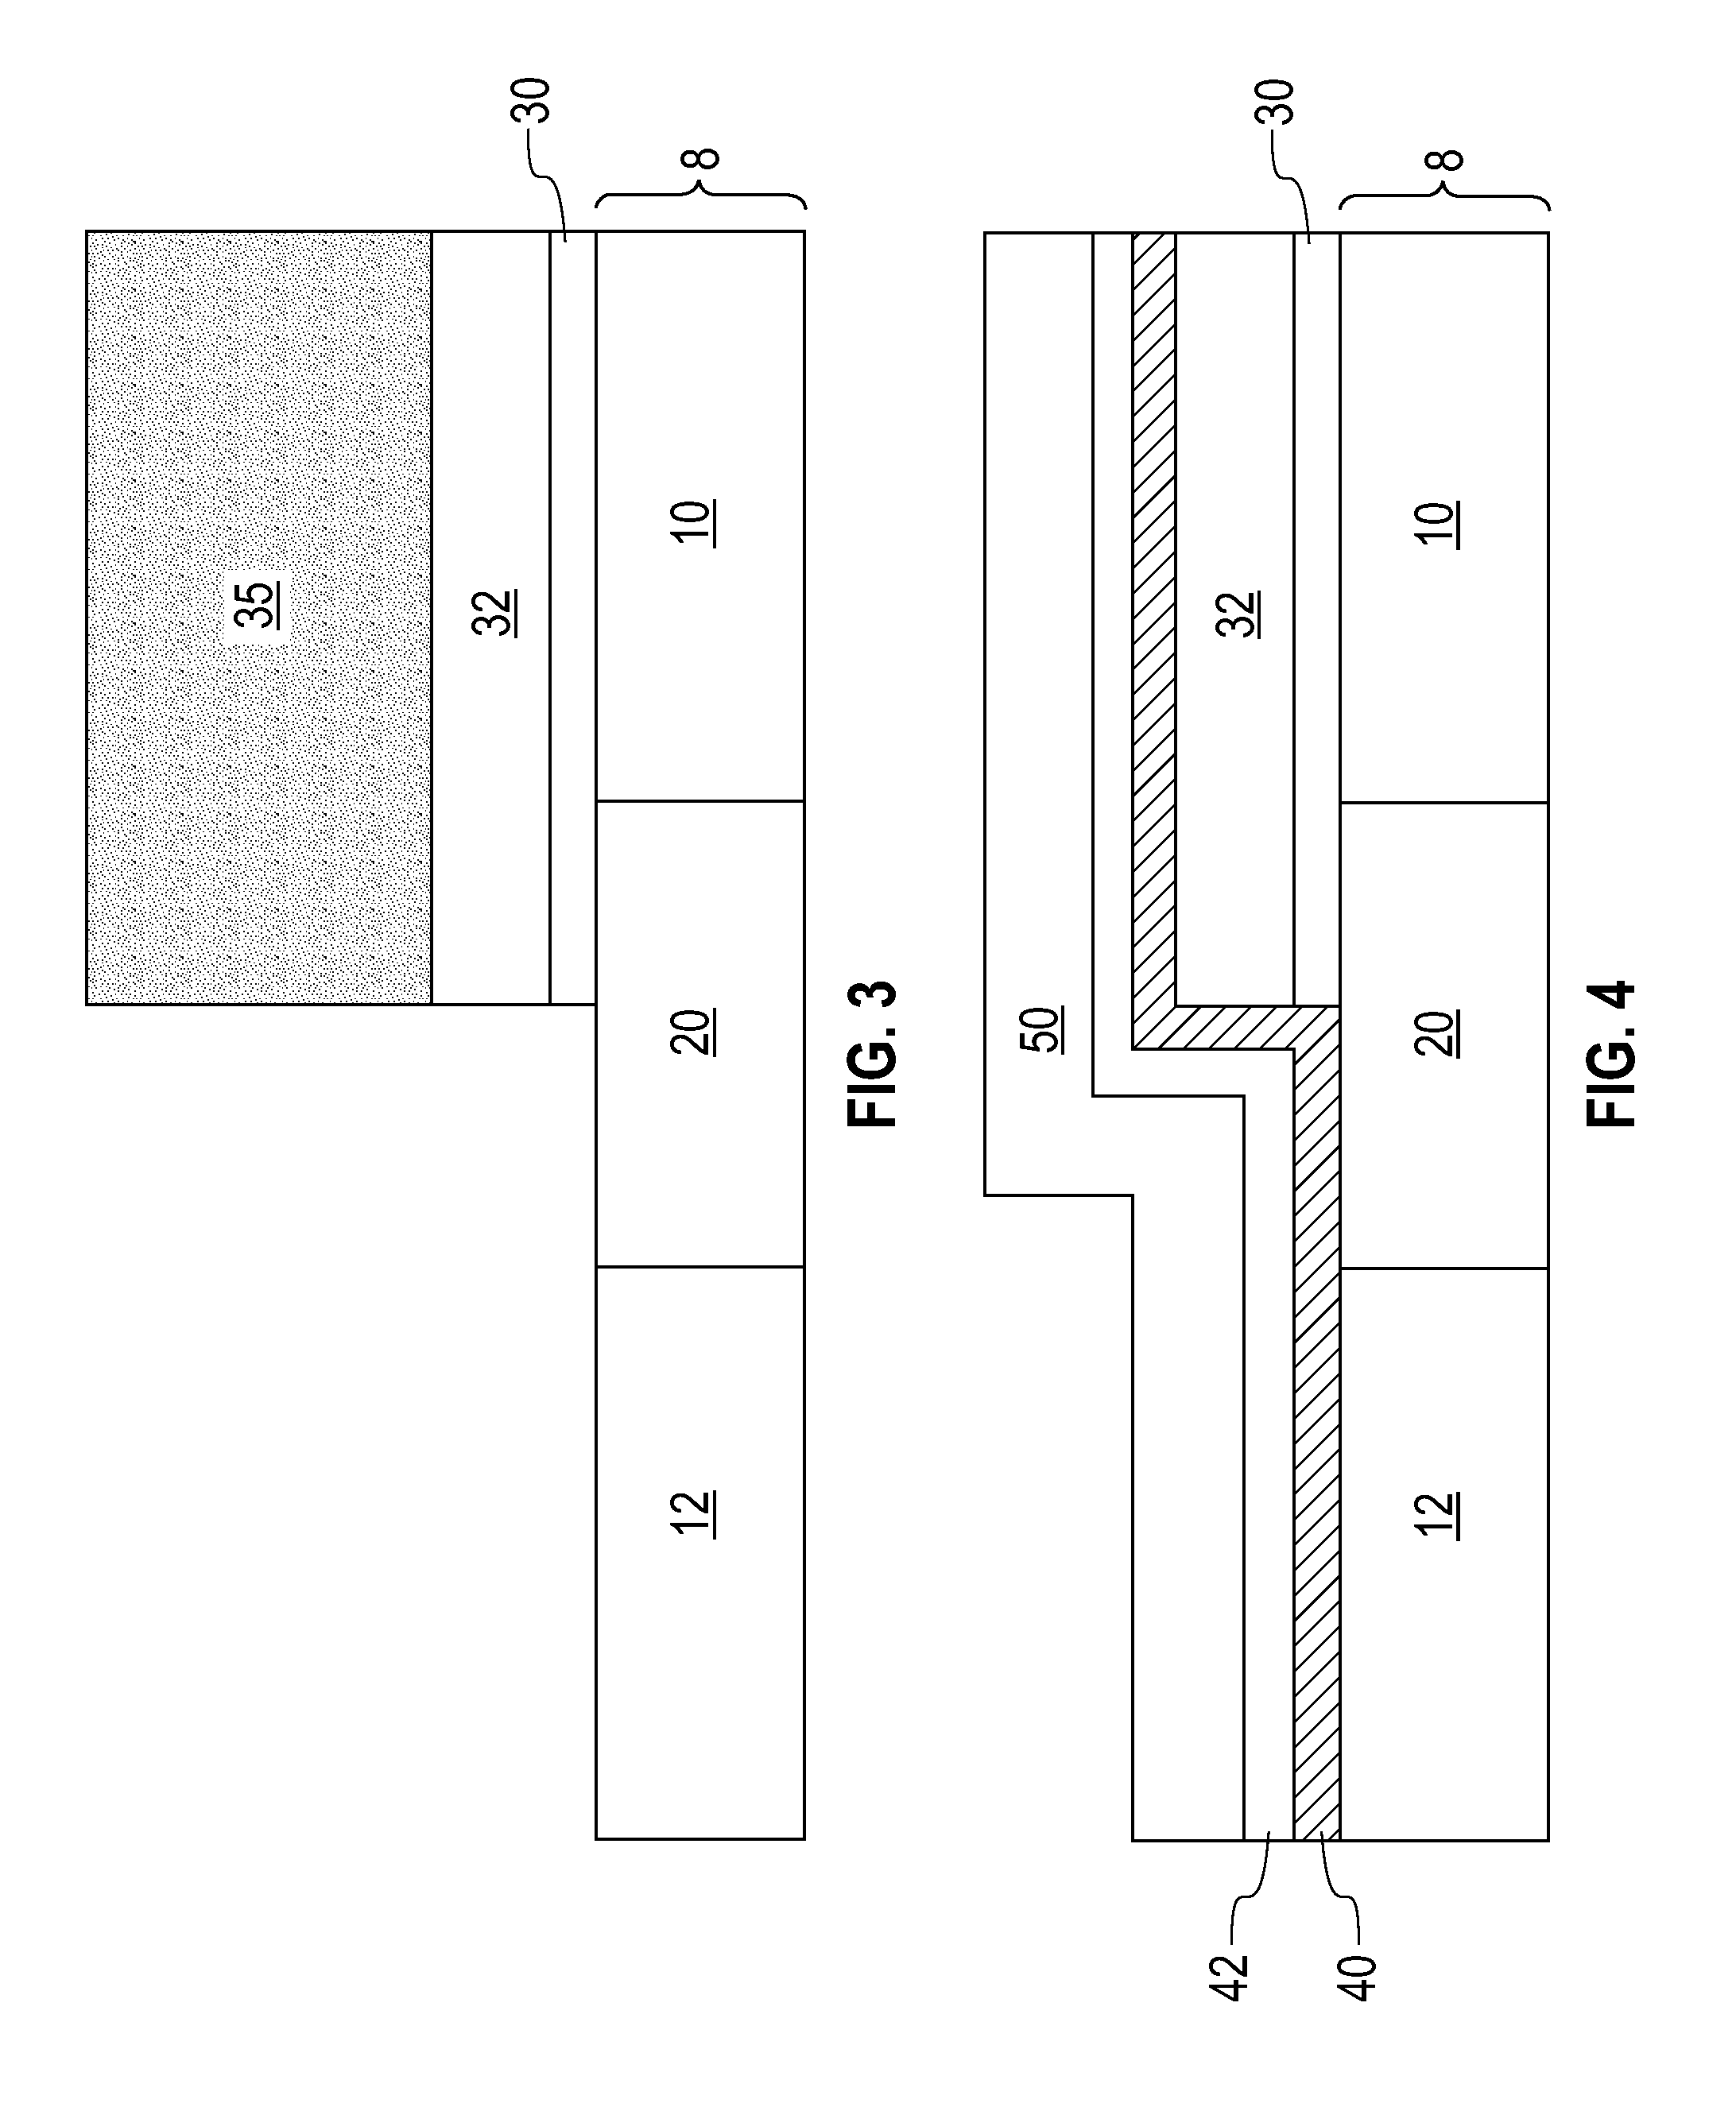 Integration schemes for fabricating polysilicon gate mosfet and high-k dielectric metal gate mosfet